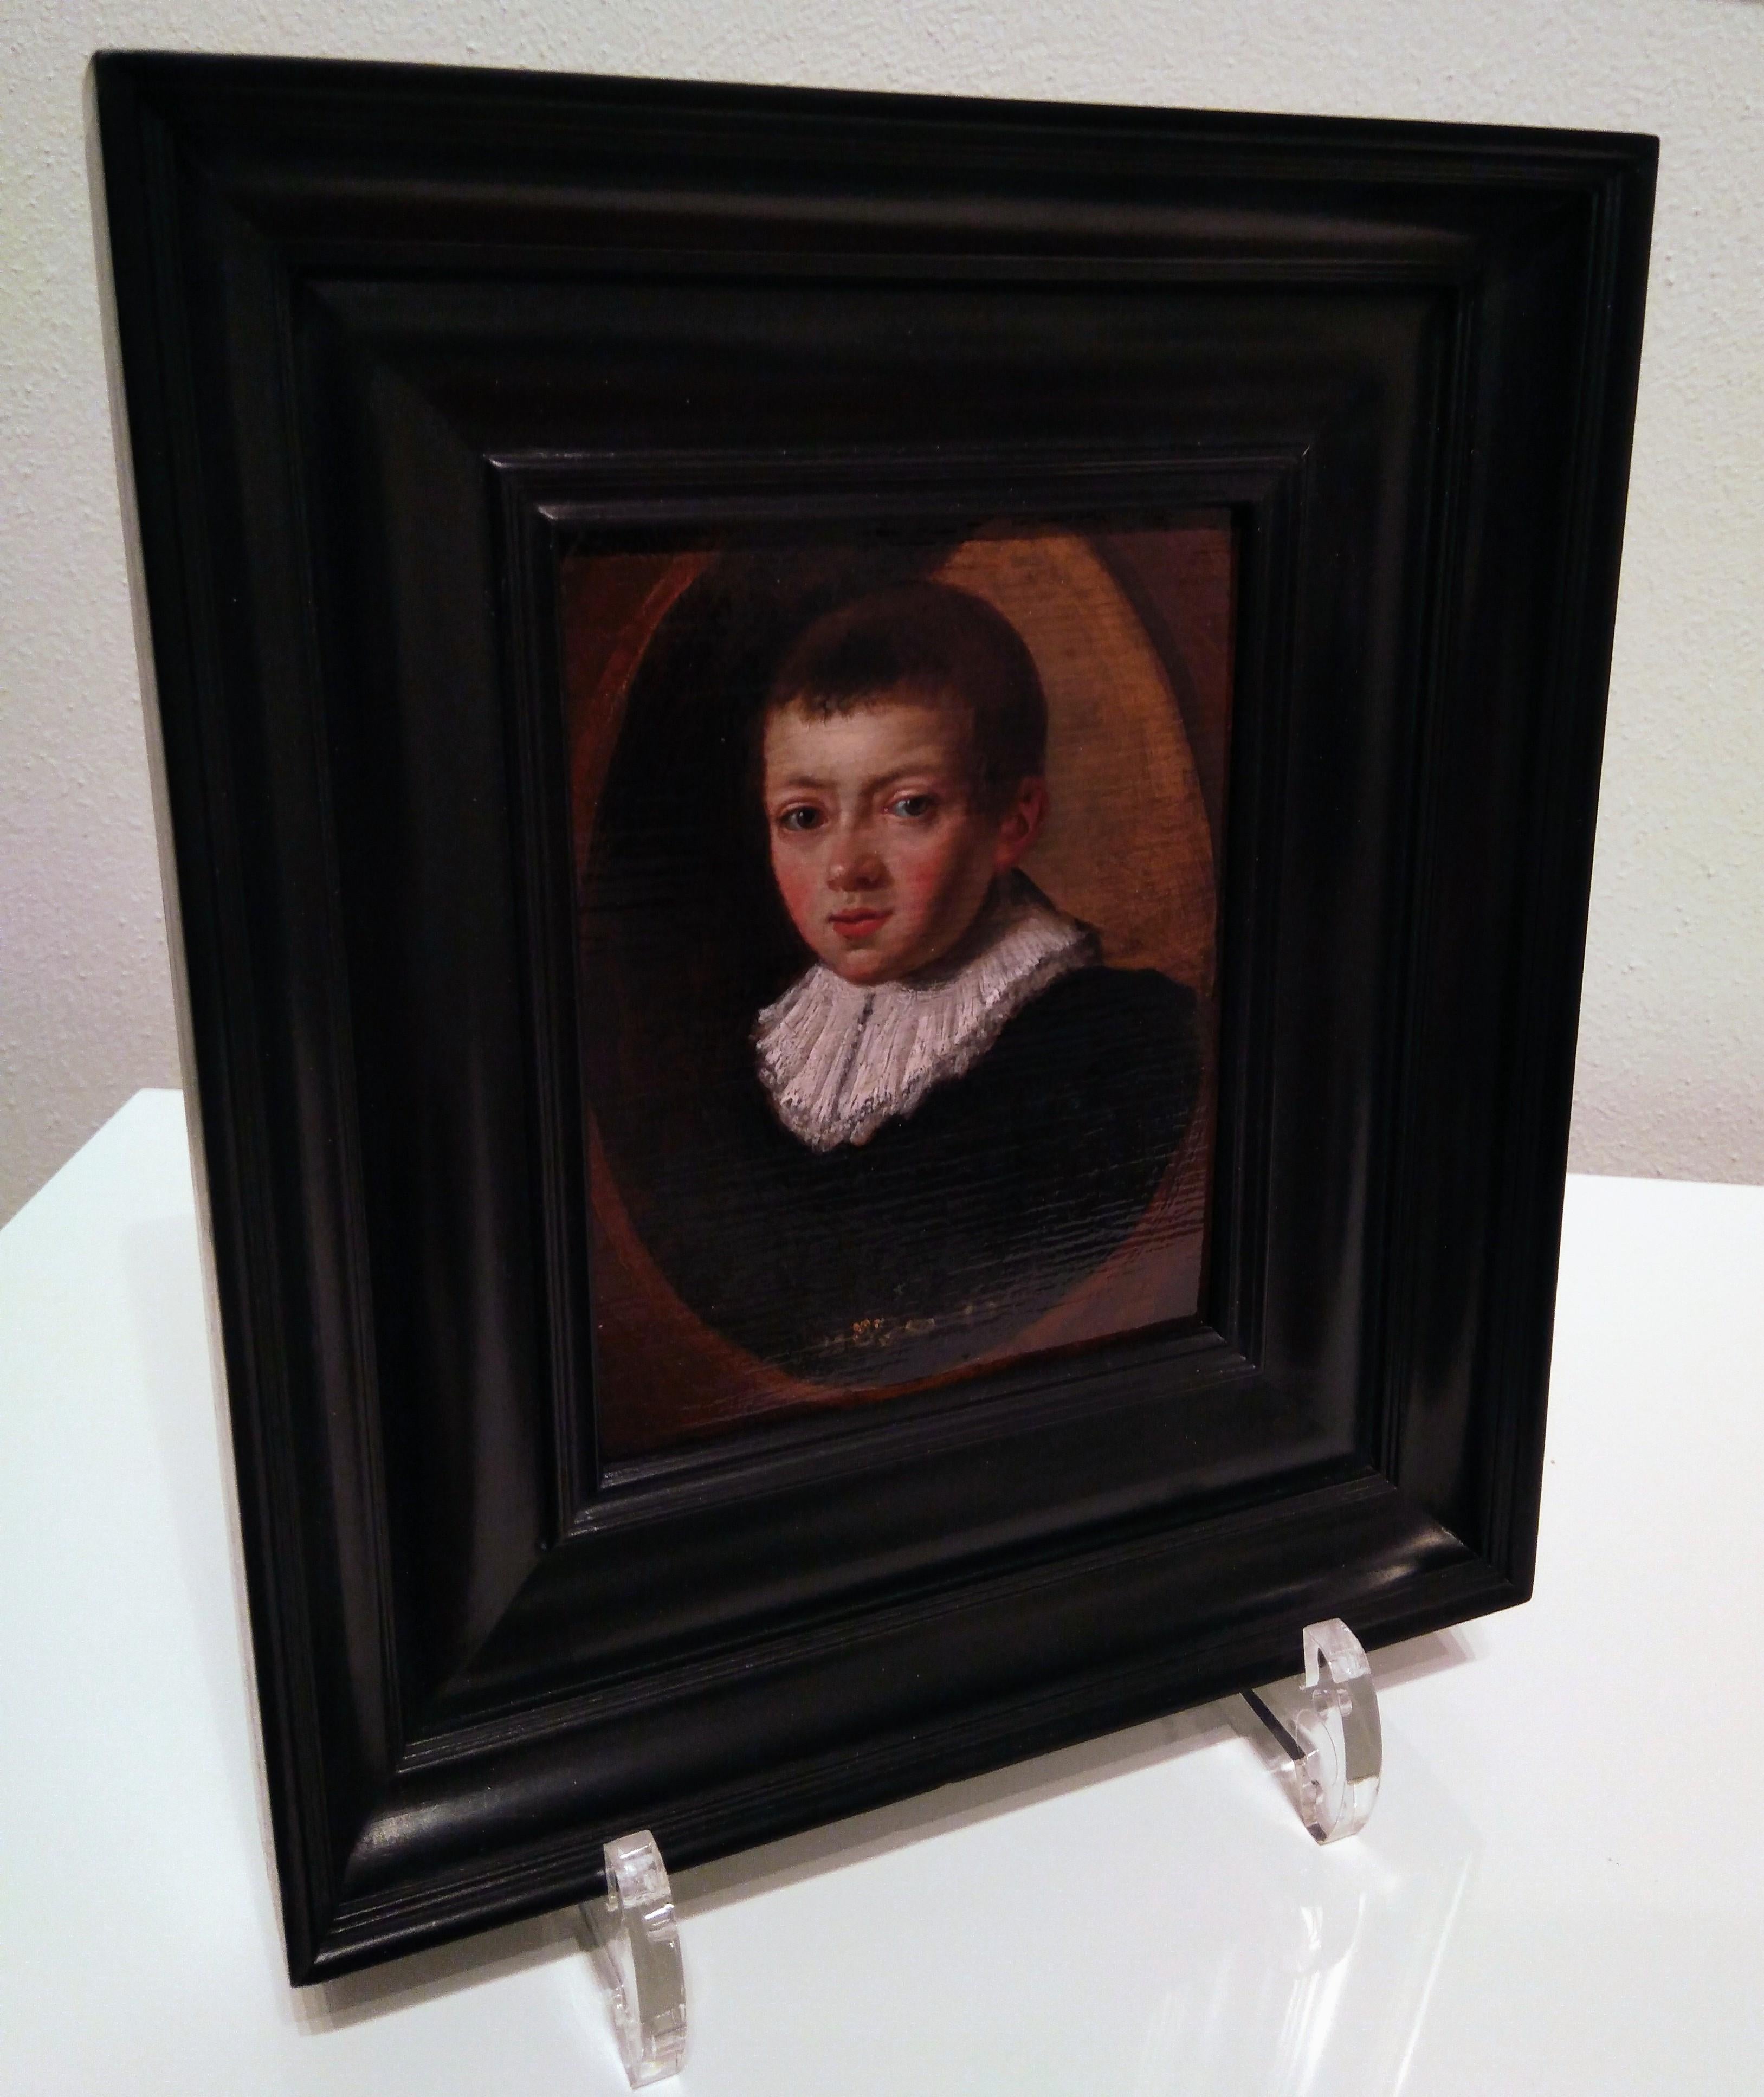 A Portrait of a Young Boy - Brown Portrait Painting by Unknown